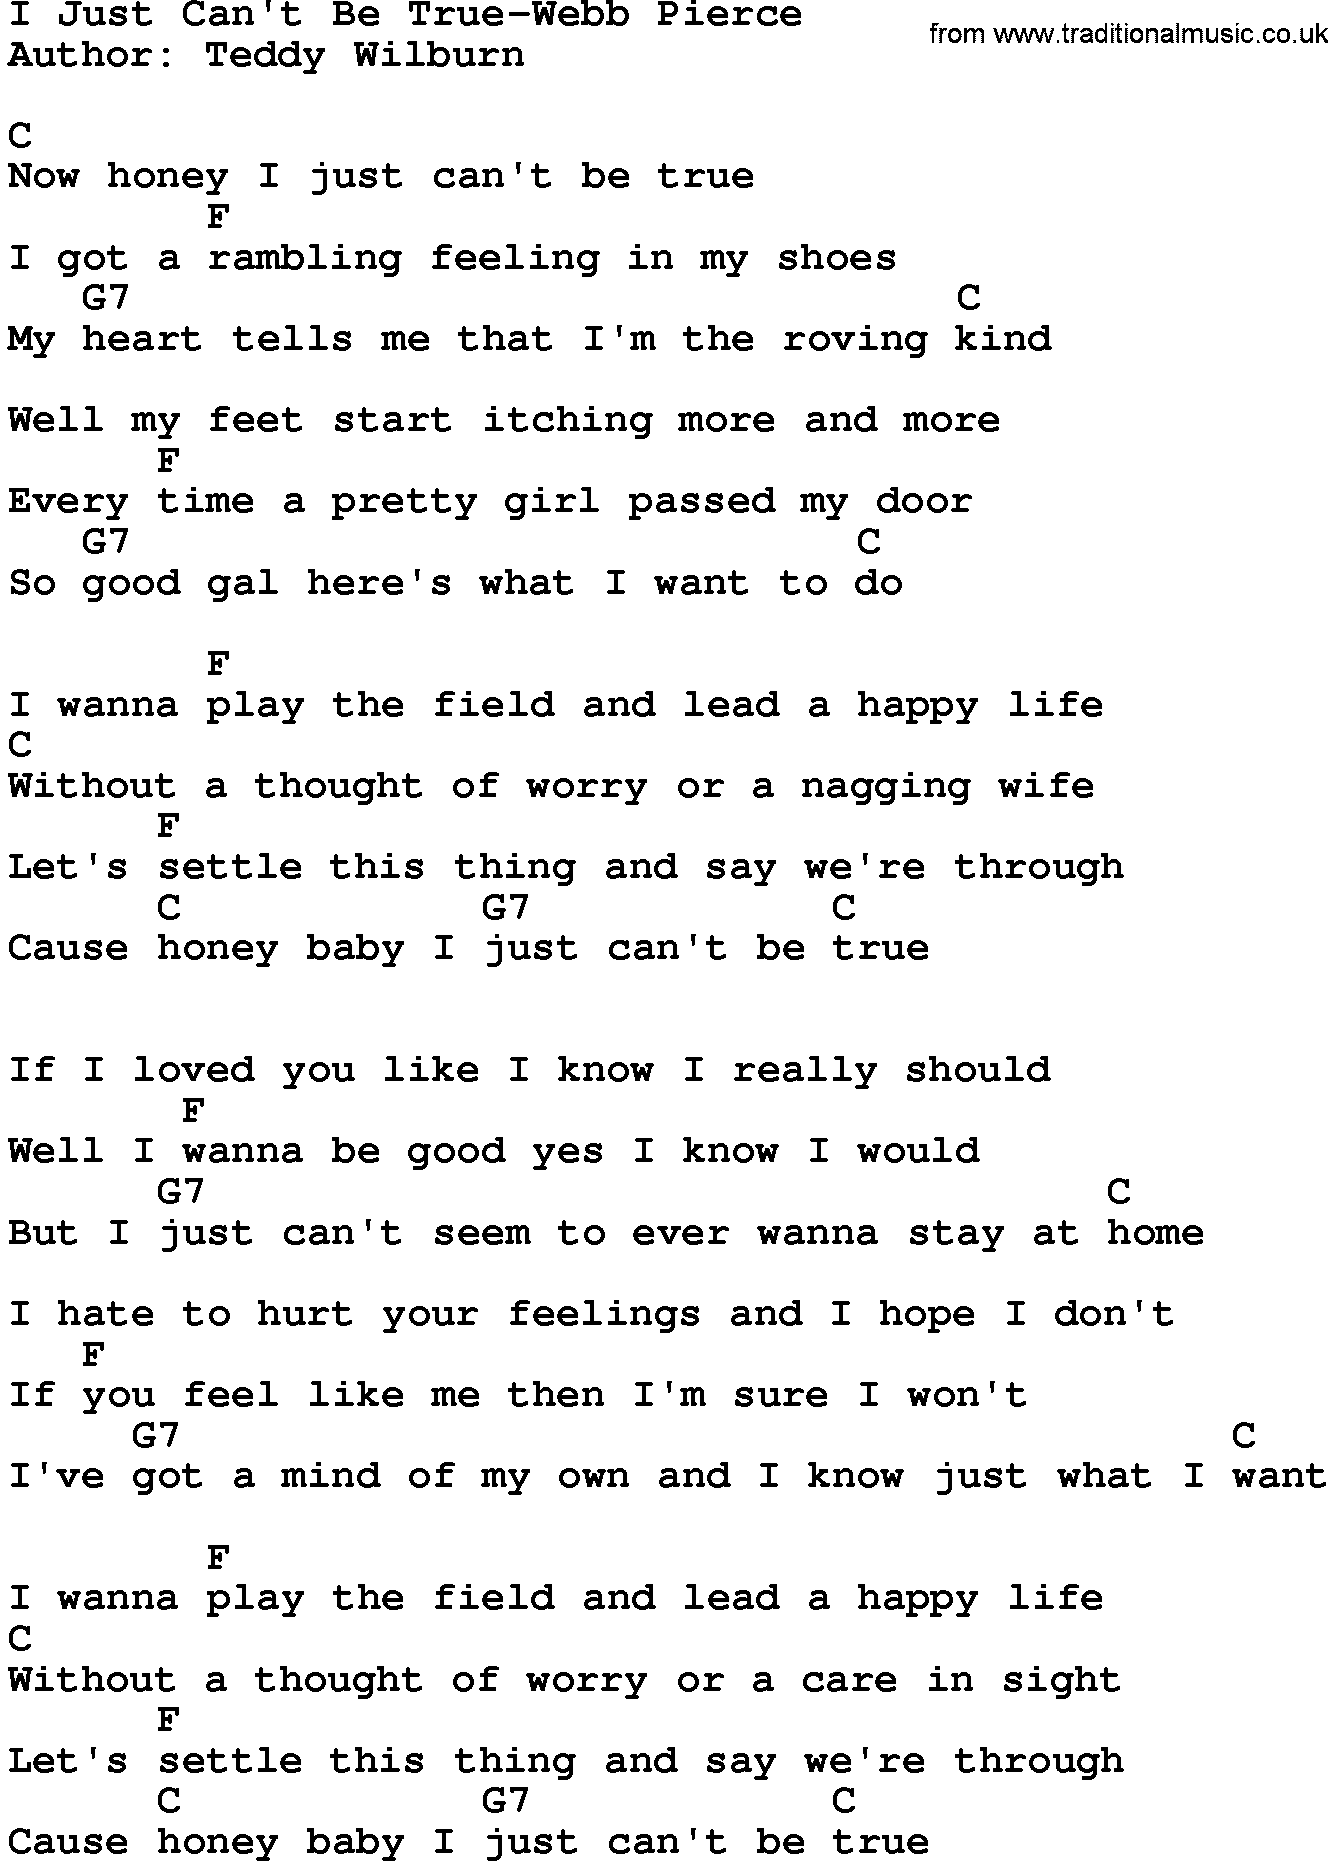 Country music song: I Just Can't Be True-Webb Pierce lyrics and chords